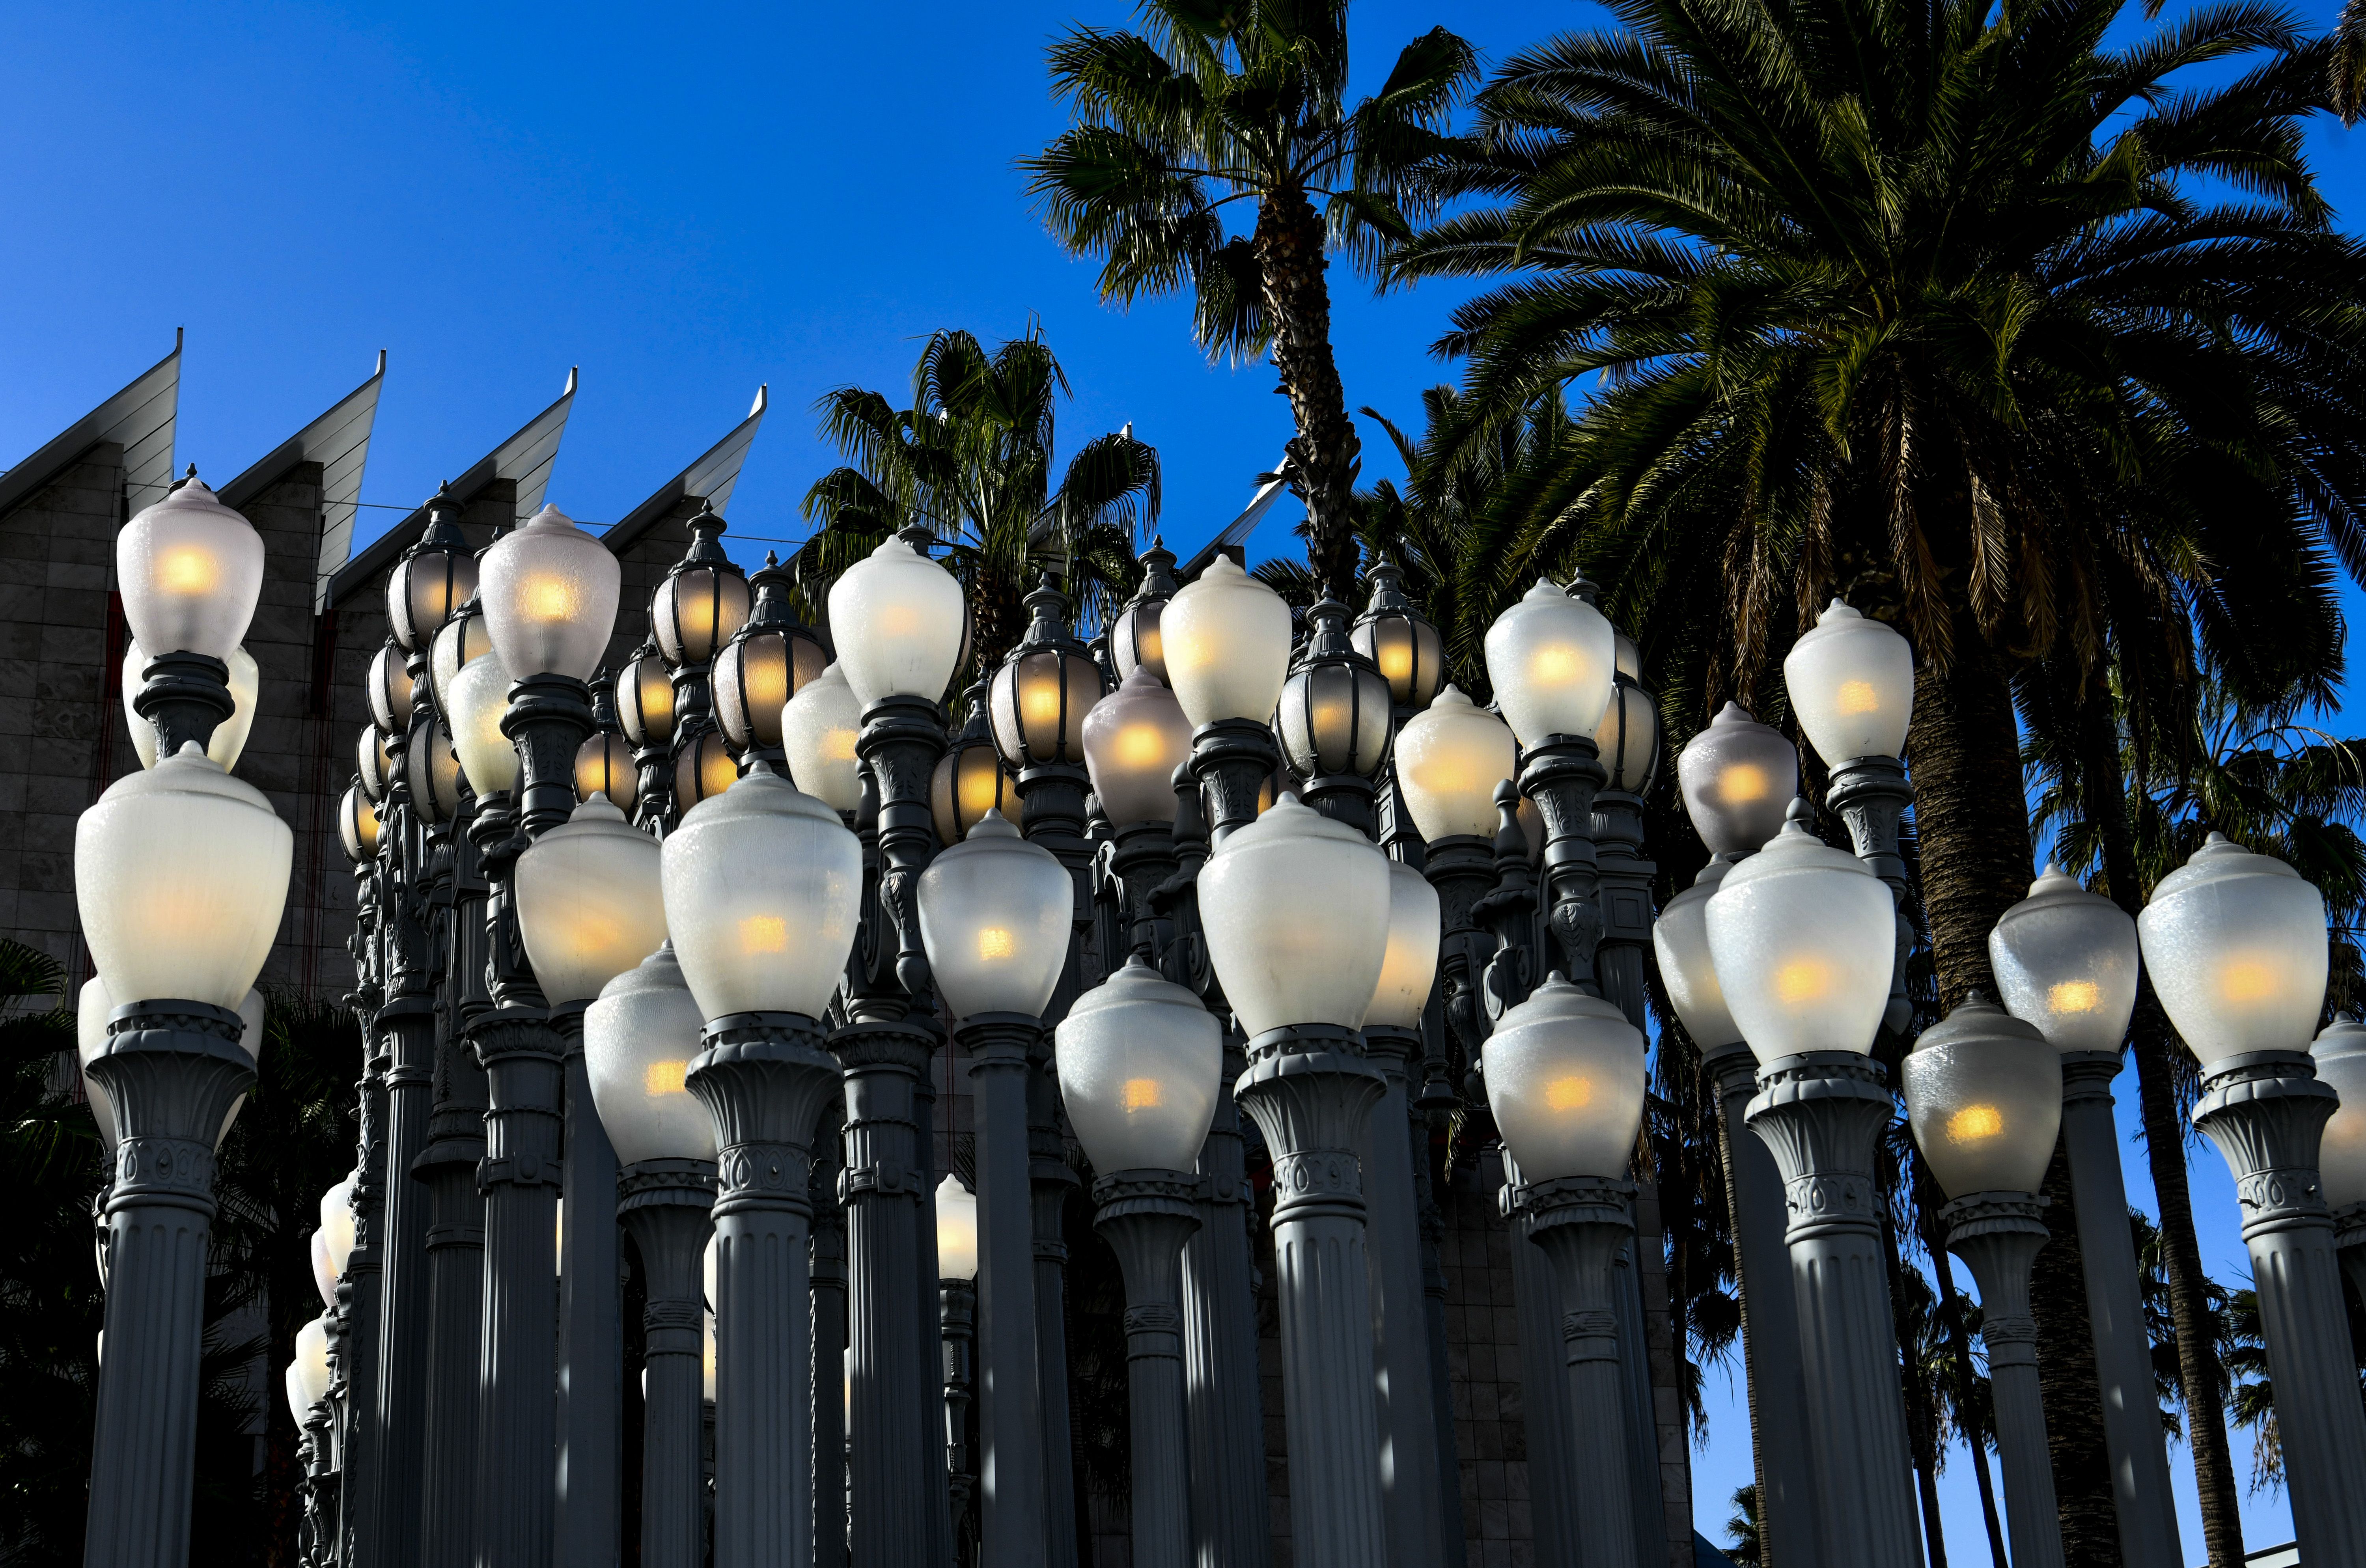 "Urban Light" by artist Chris Burden illuminates an amber hue at 2:30pm PST to support the Biden Inaugural Committee's COVID-19 Memorial